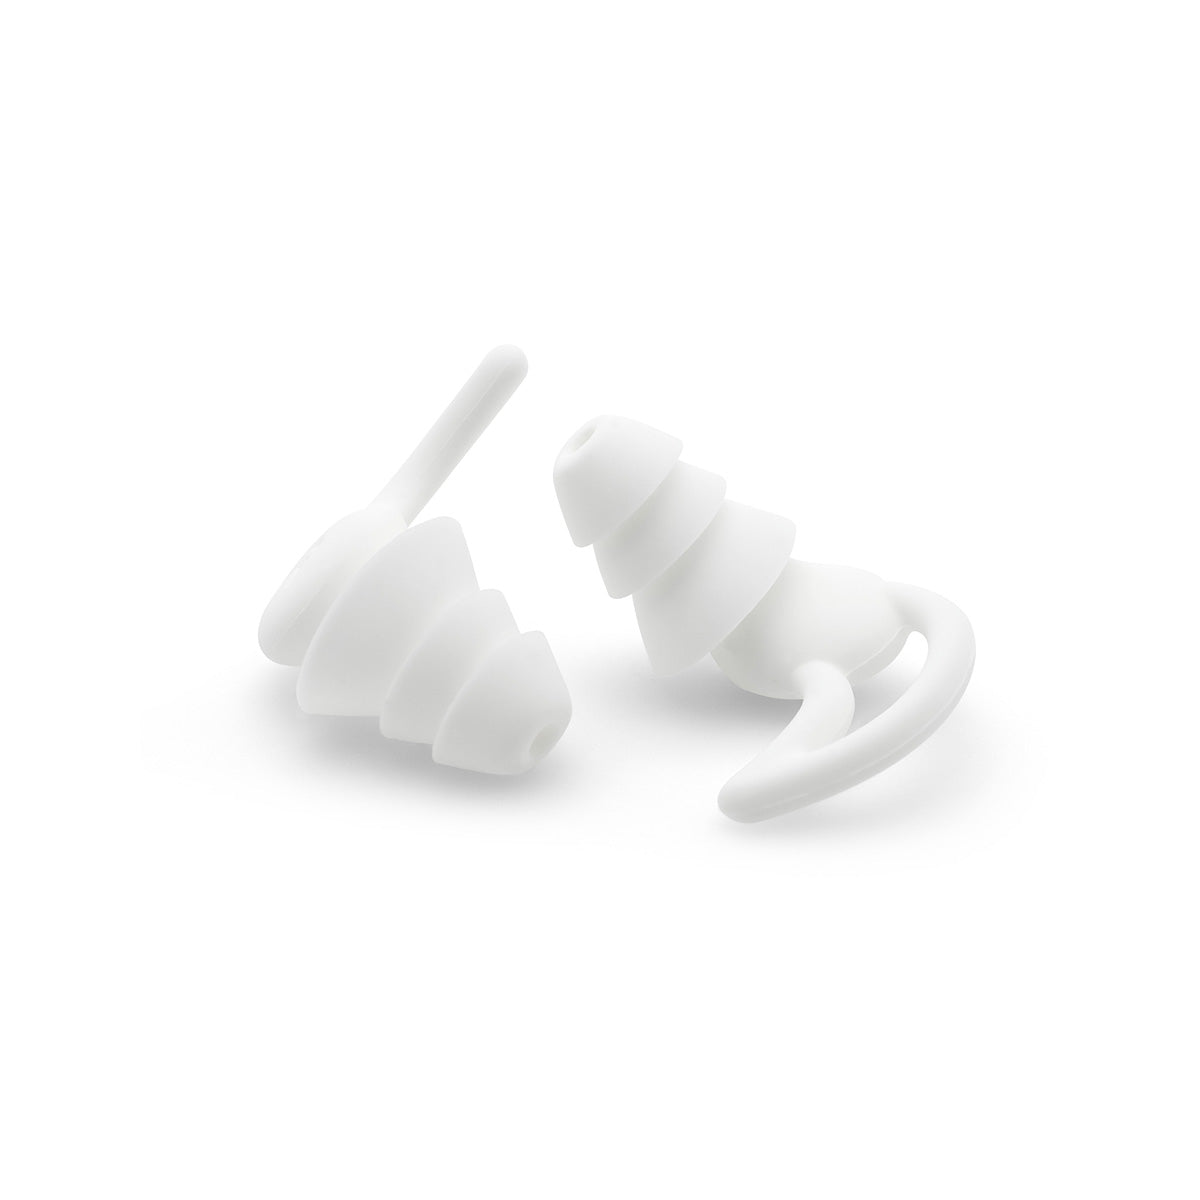 ADV. Eartune Dream U Sleep Ear Plugs for Medidation, Relaxation, Snoring Husband #color_white